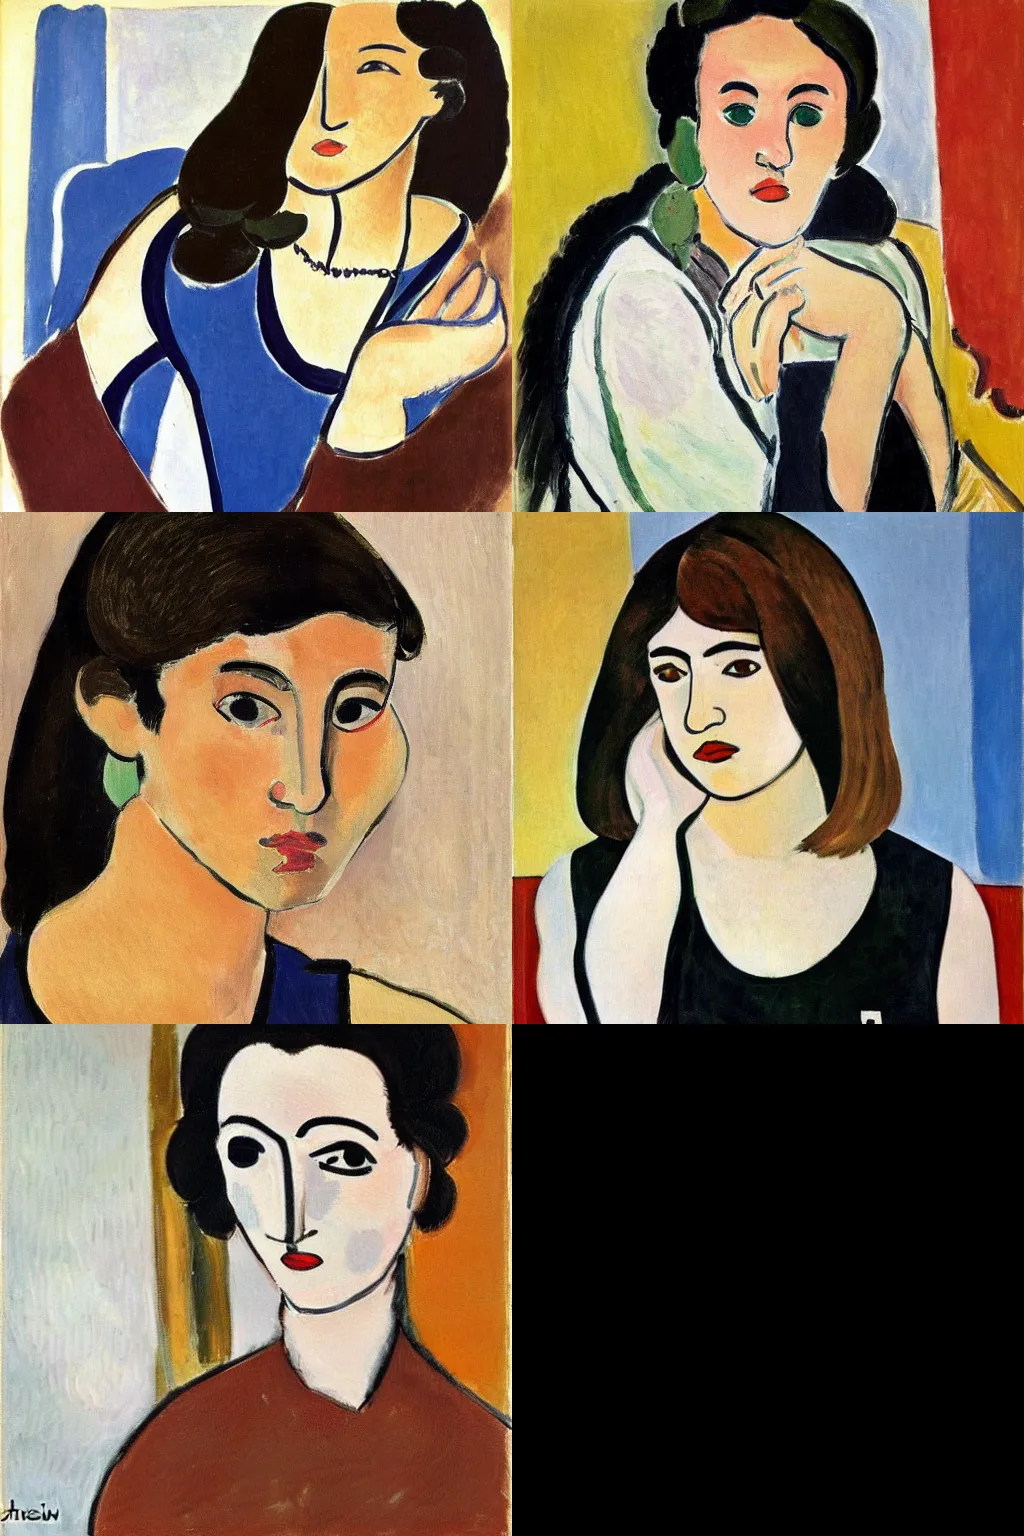 Prompt: an hd painting of a woman by henri matisse. she has straight long dark brown hair, parted in the middle. she has large dark brown eyes, a small refined nose, and thin lips. she is wearing a t - shirt with the supreme brand logo lettering on it, a sleeveless white blouse, a pair of dark brown capris, and black loafers.